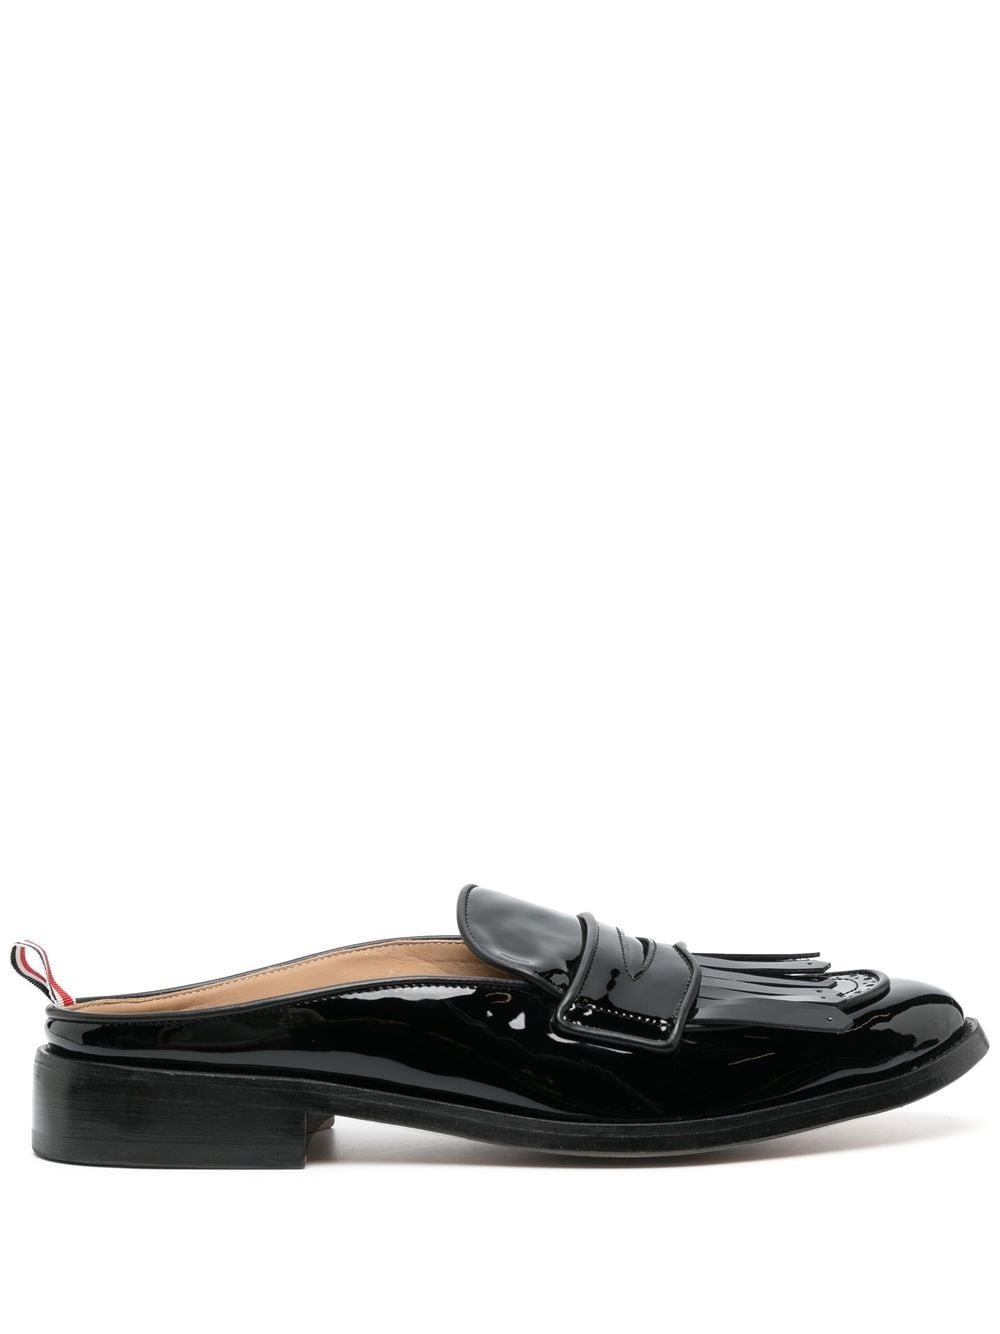 Thom Browne Patent Mule Loafers In Black